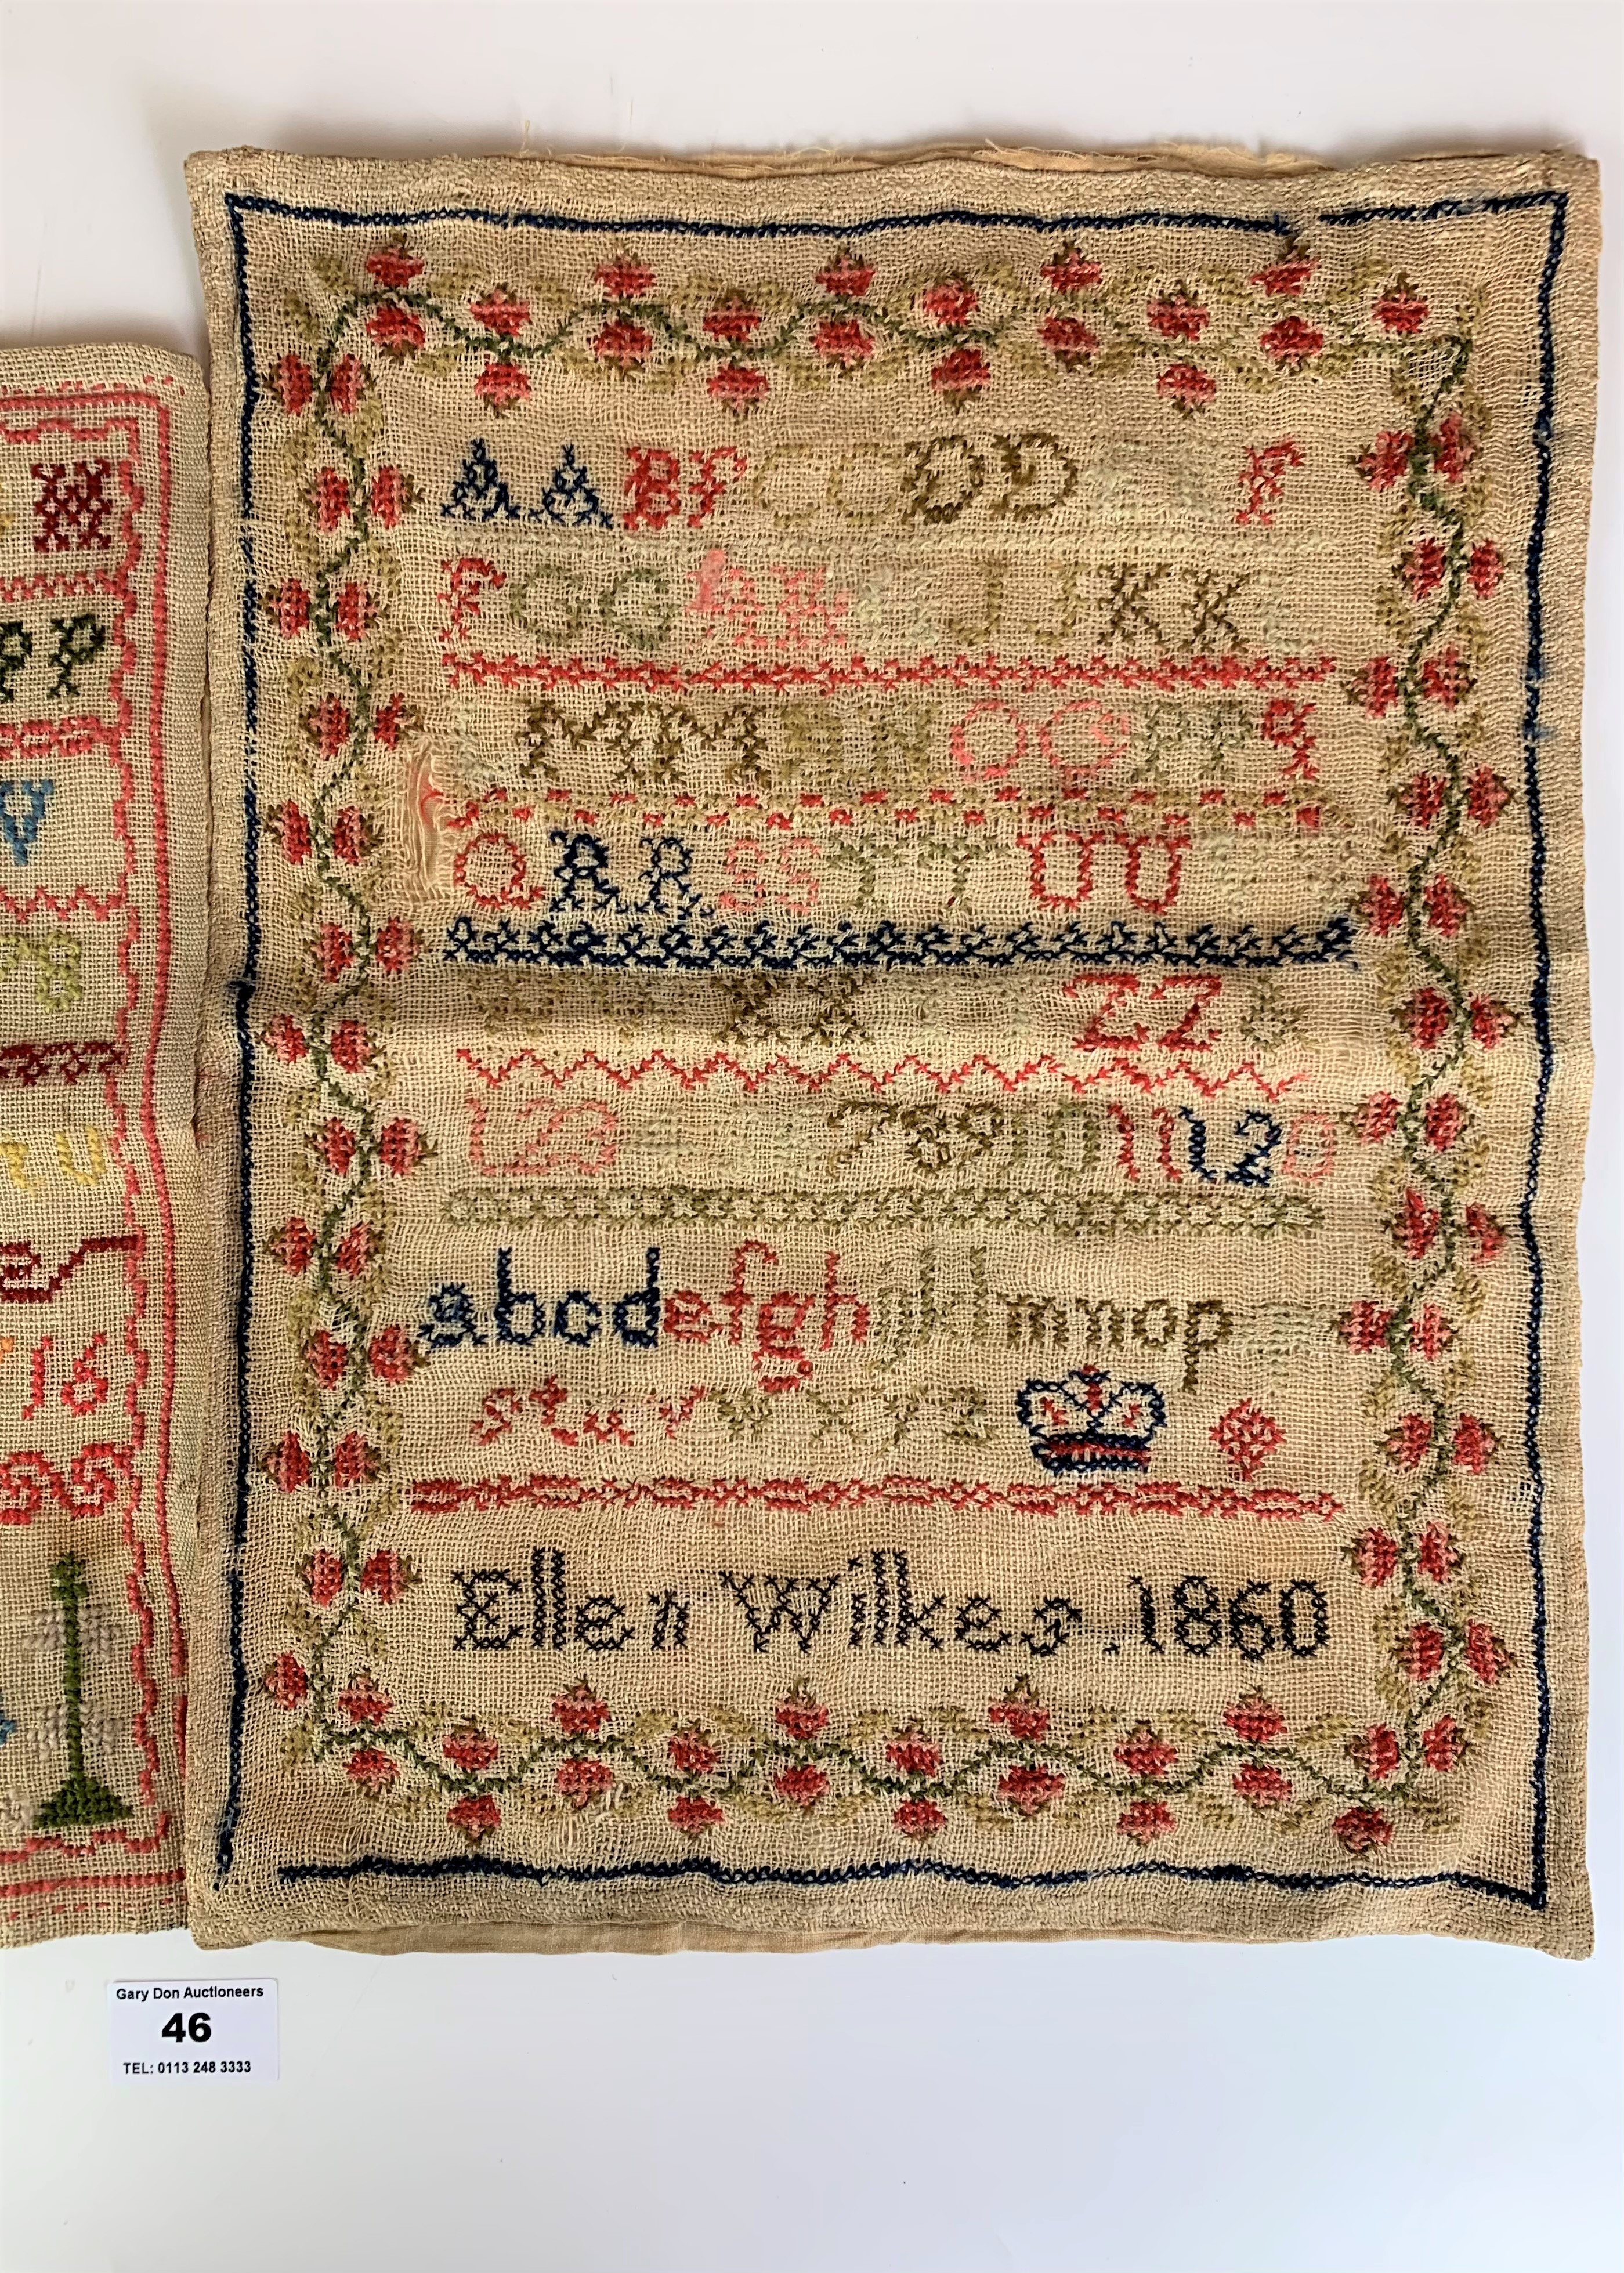 2 samplers – Ellen Wilkes 1860 with lined back 11” x 13.5” and Ethel M. Smith, aged 8 years 12” x - Image 4 of 5